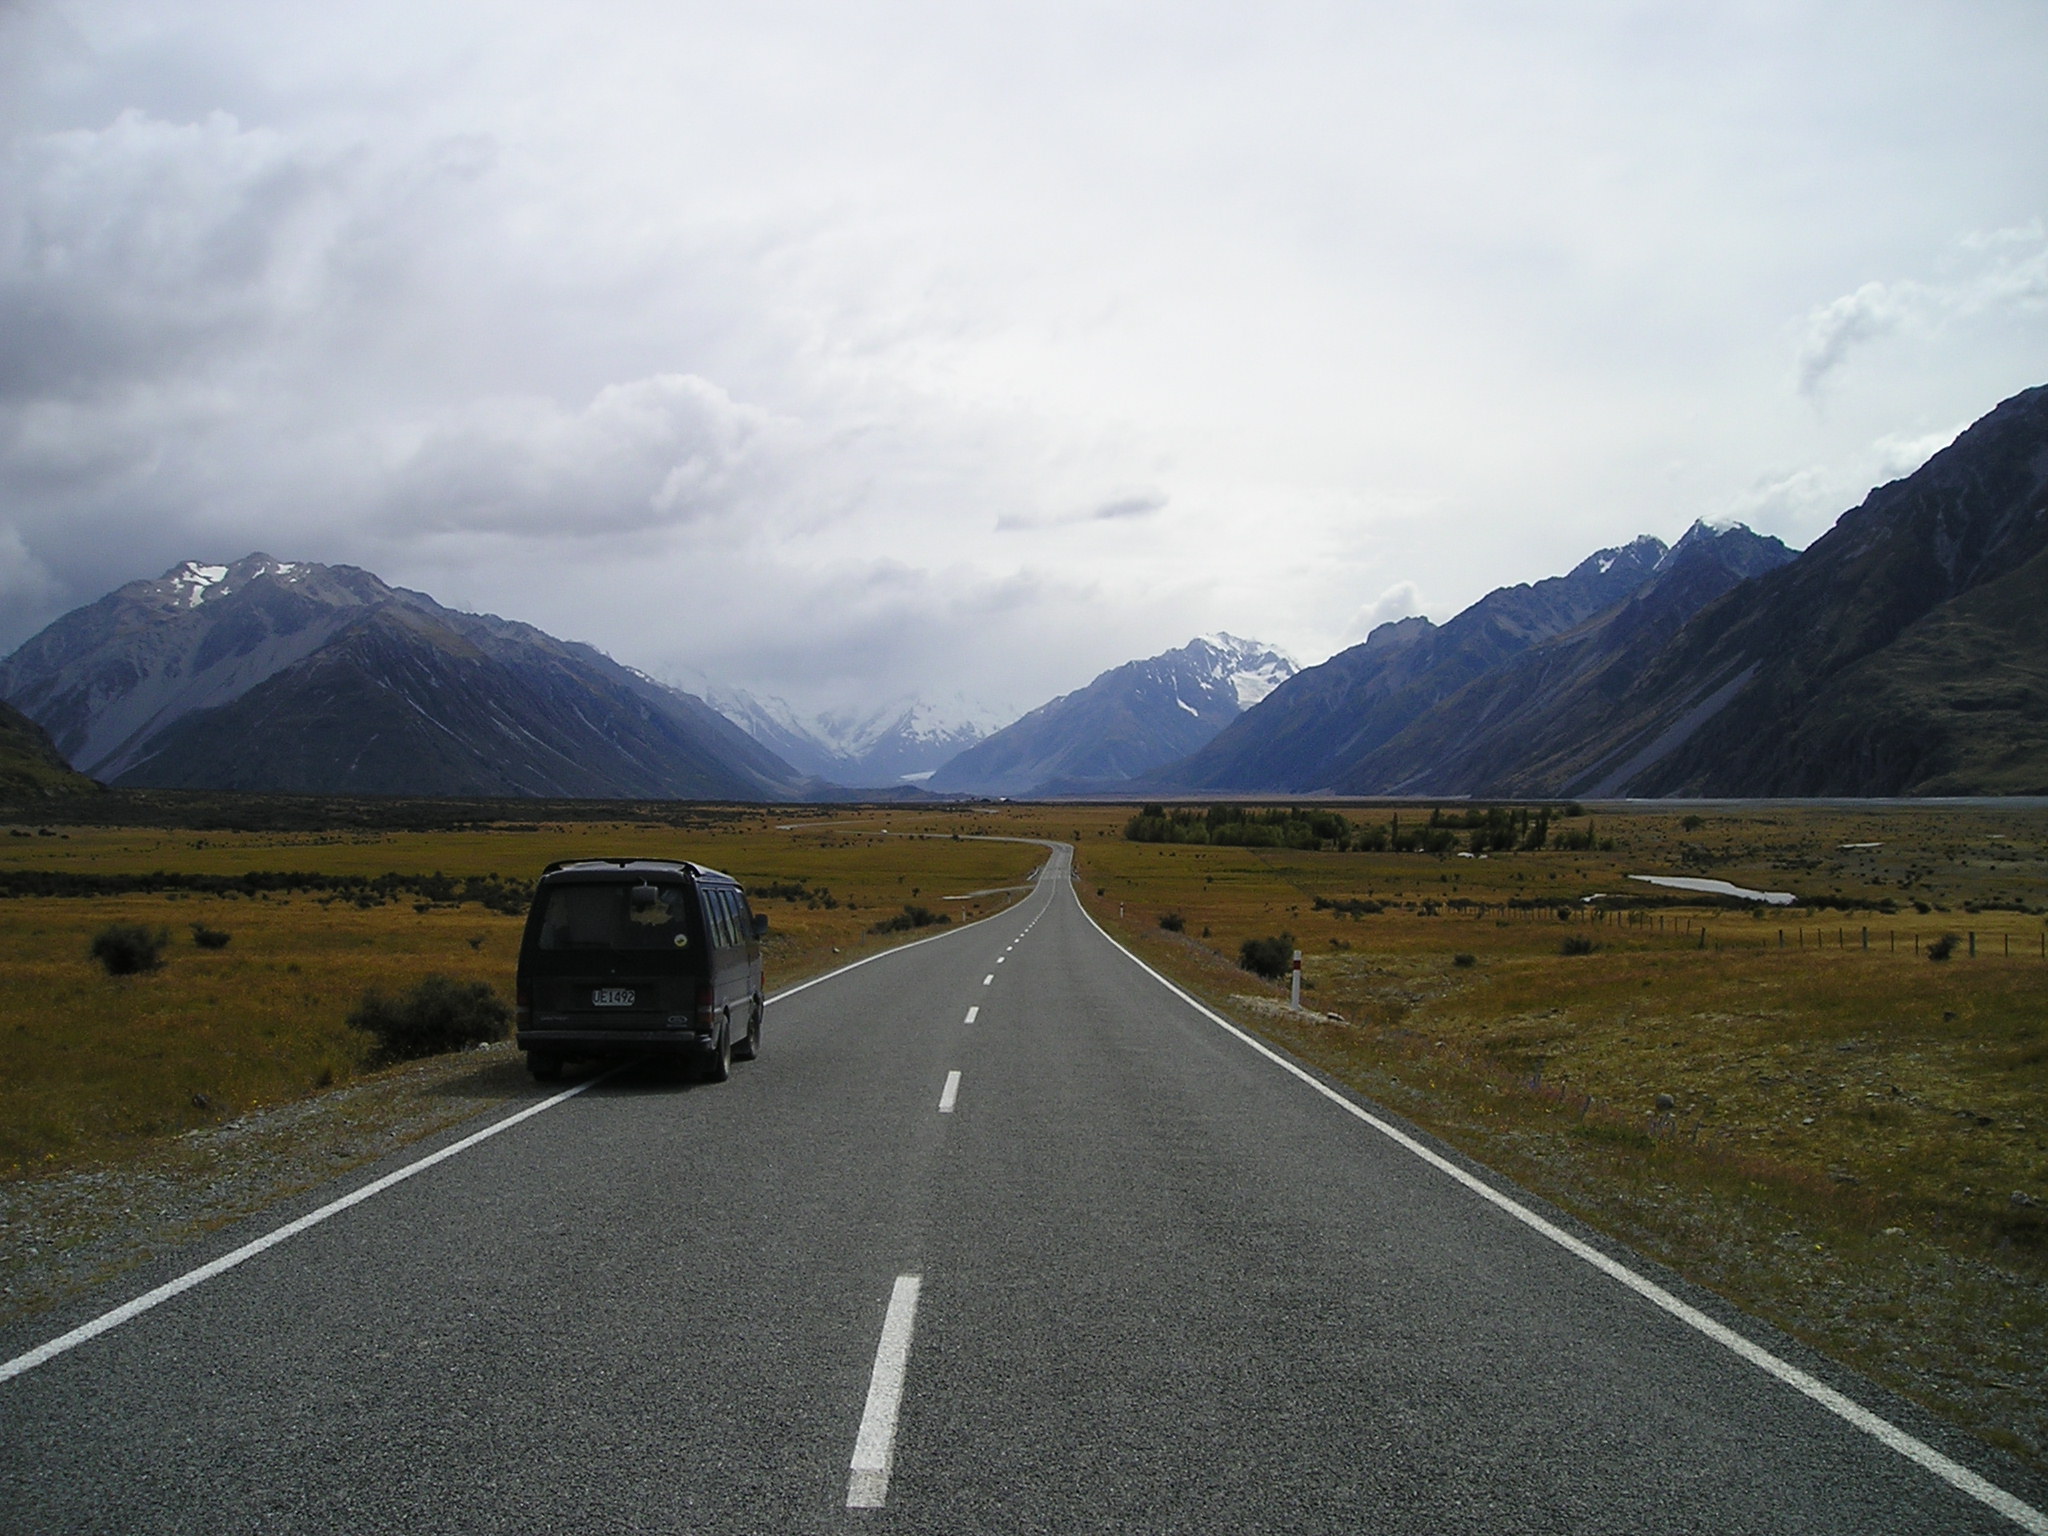 New Zealand Transport Agency for a National Incident and Event Management System